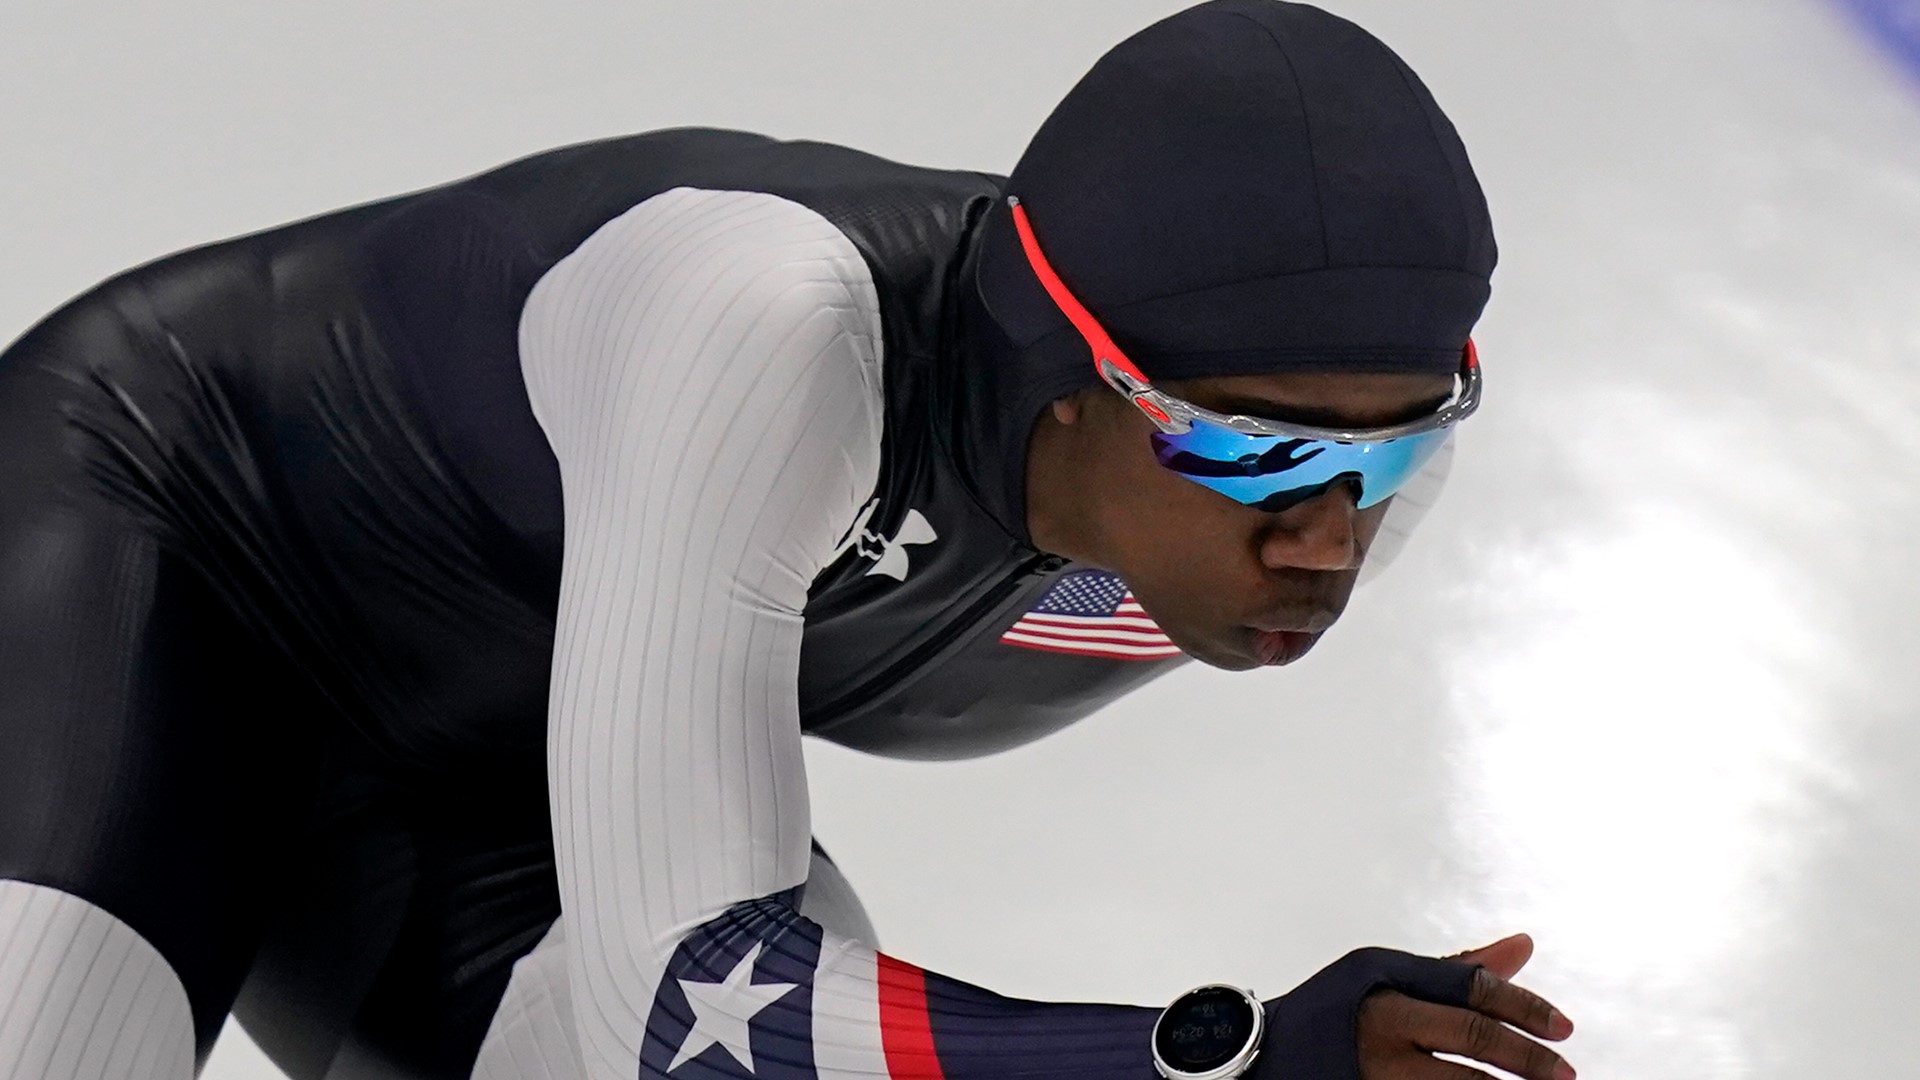 Erin Jackson, the world's No. 1 500-meter speedskater has a chance to bring the U.S. gold after she nearly missed the Olympics altogether.